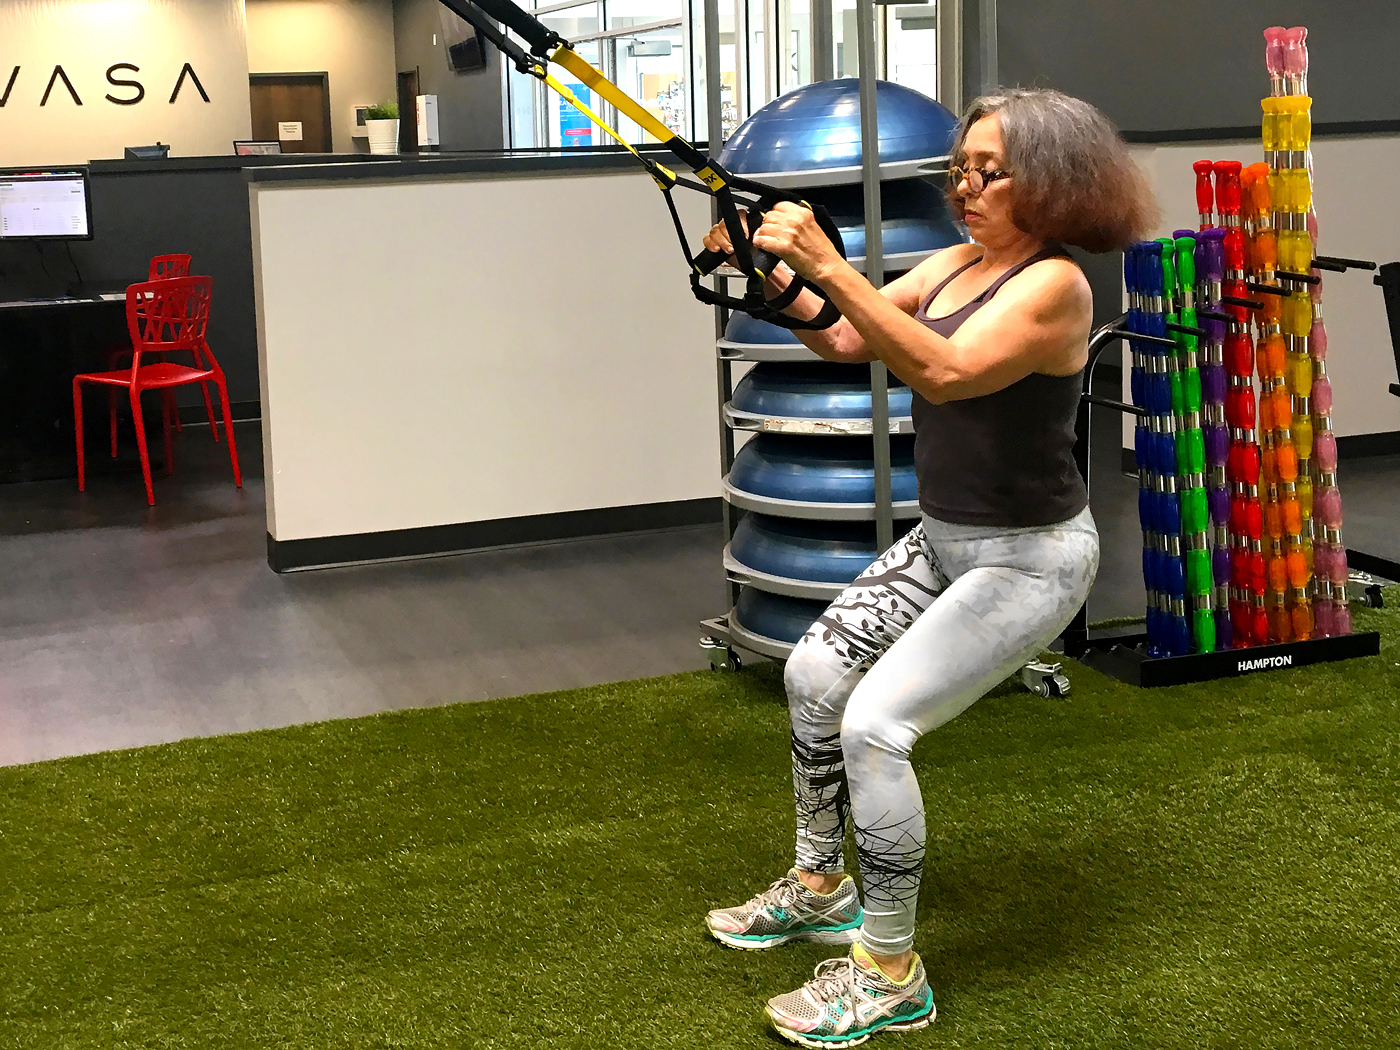 Senior fitness junkies living proof 'you're never too old' to live